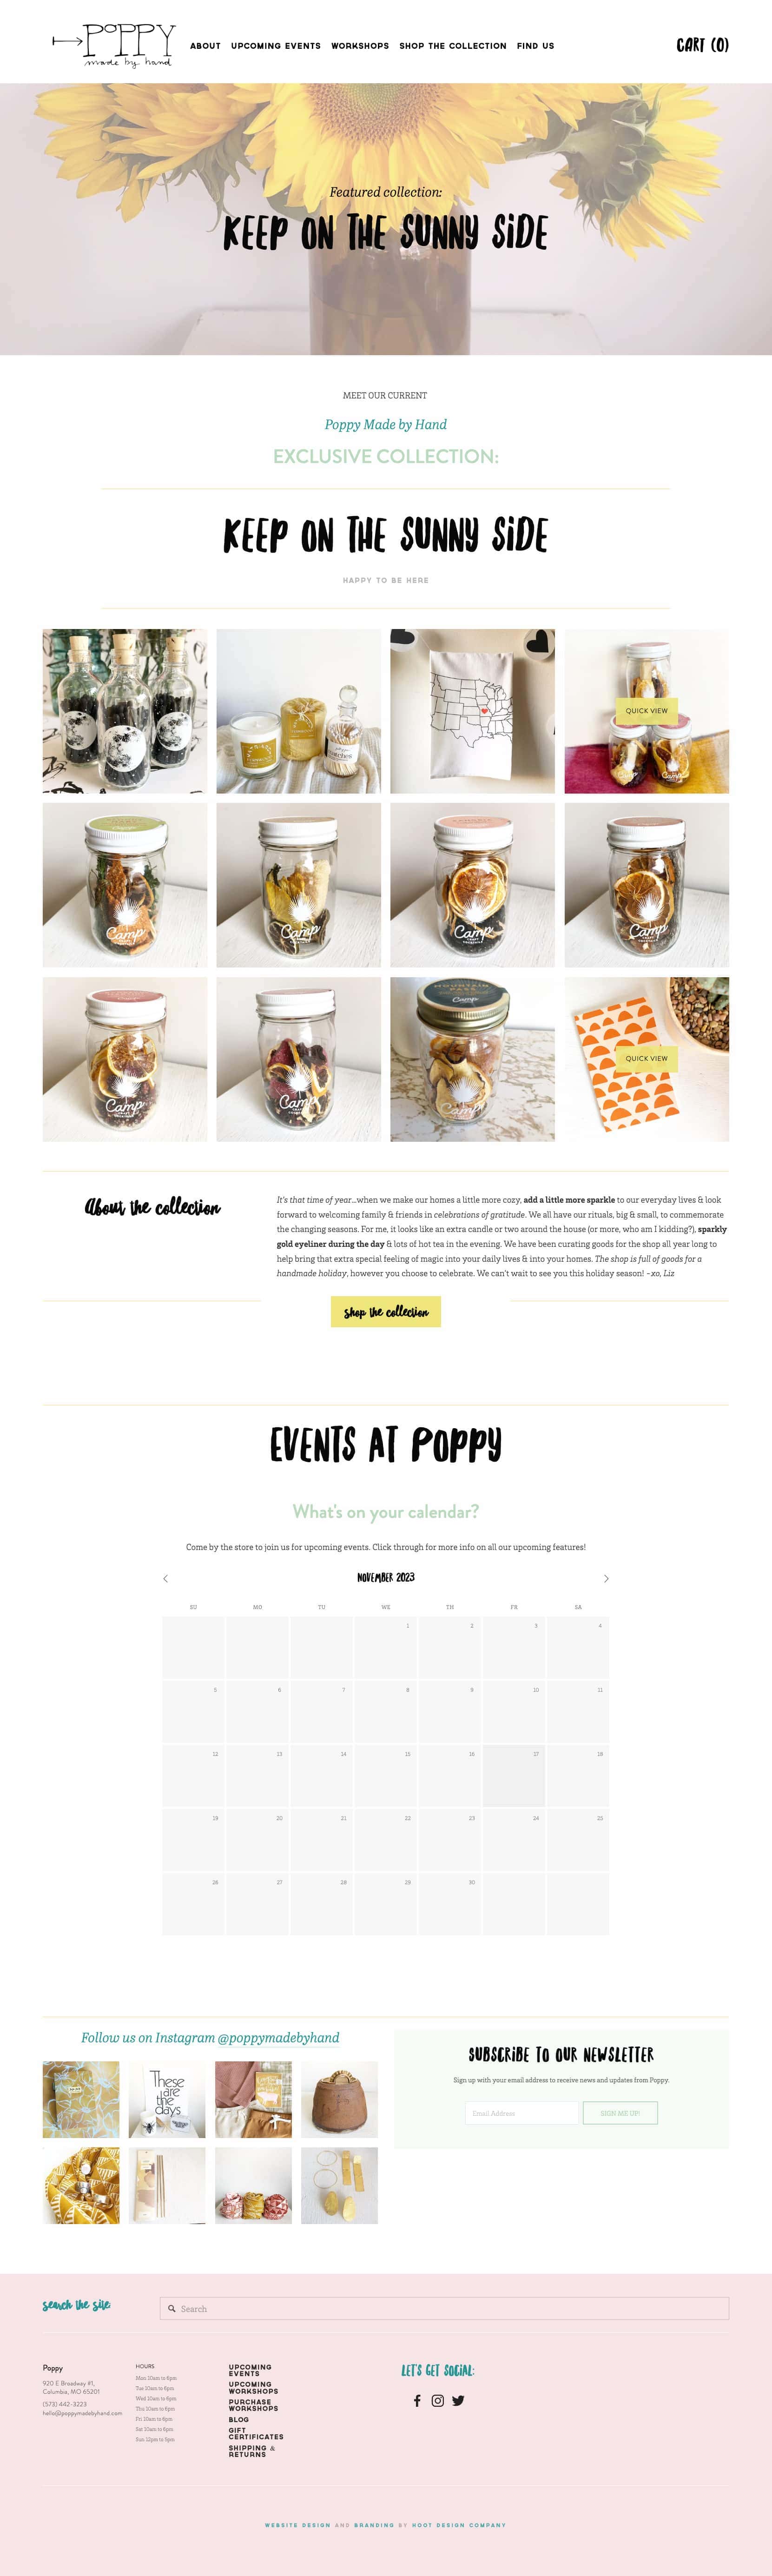 Squarespace Ecommerce Ex. 14: Poppy Made by Hand - Minimalist Design, Inviting Space